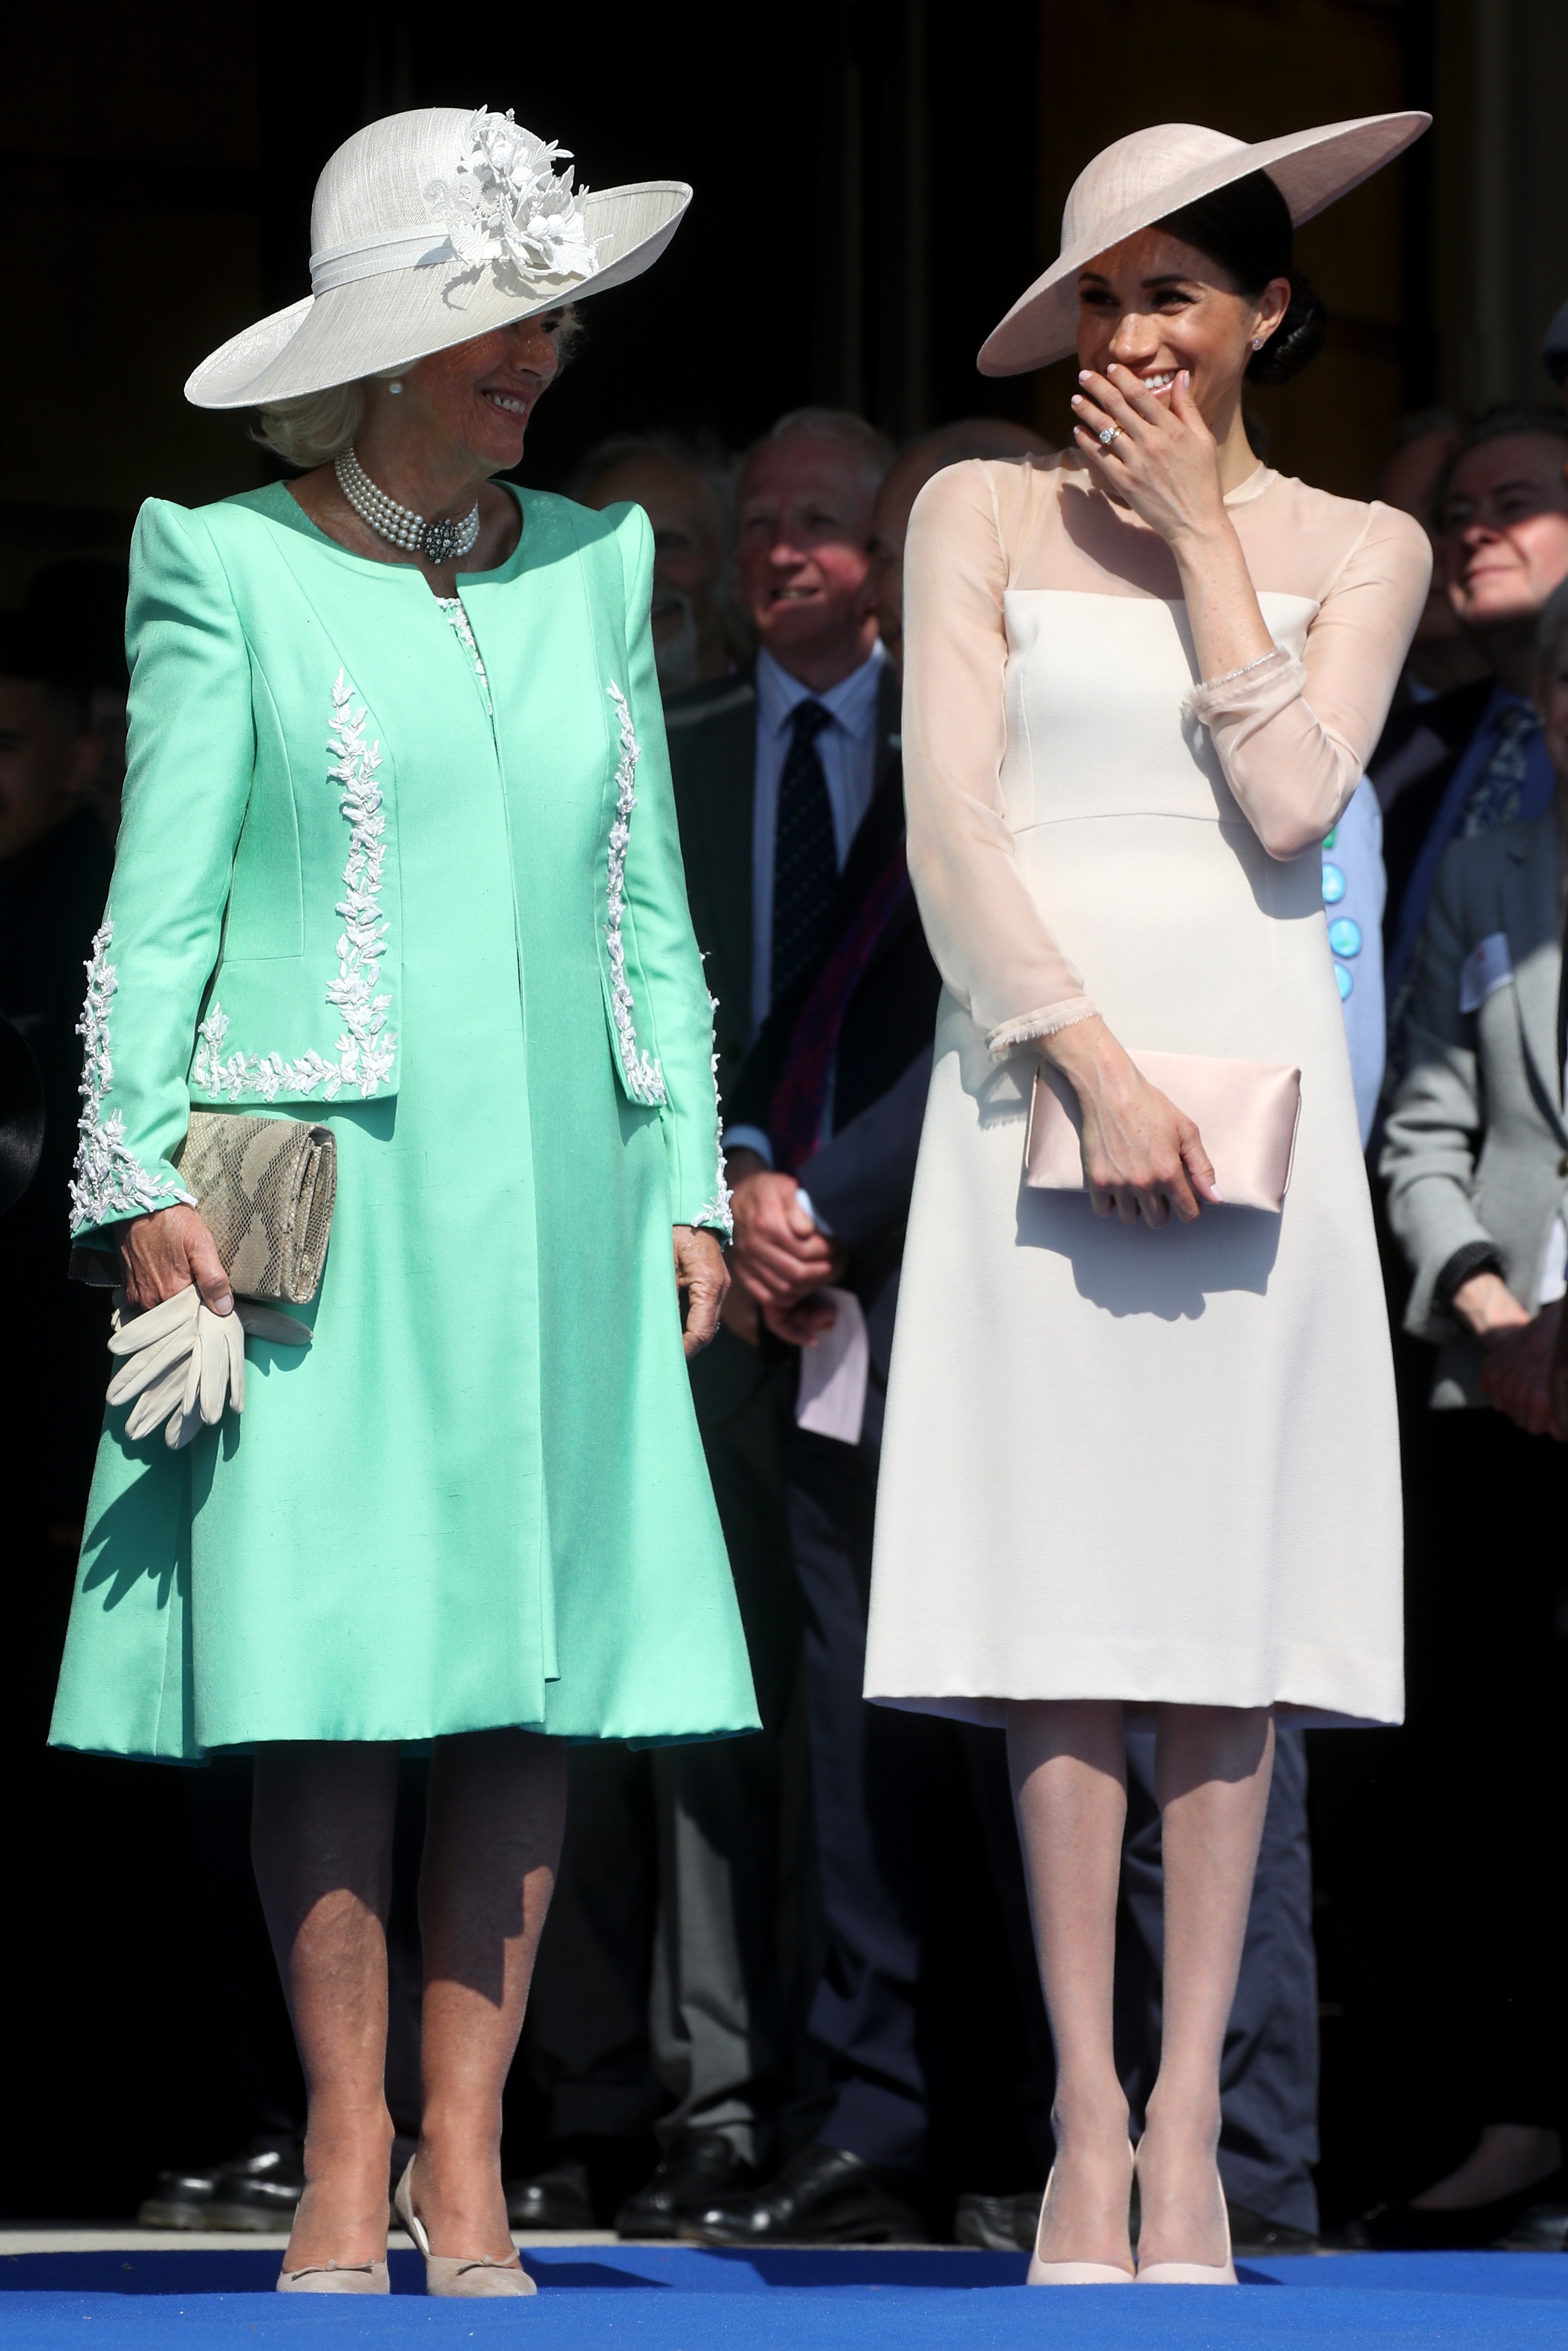 Duchess Camilla and Duchess Meghan at the Prince of Wales' 70th birthday celebration on May 22, 2018 in London, England.  |  Source: Getty Images